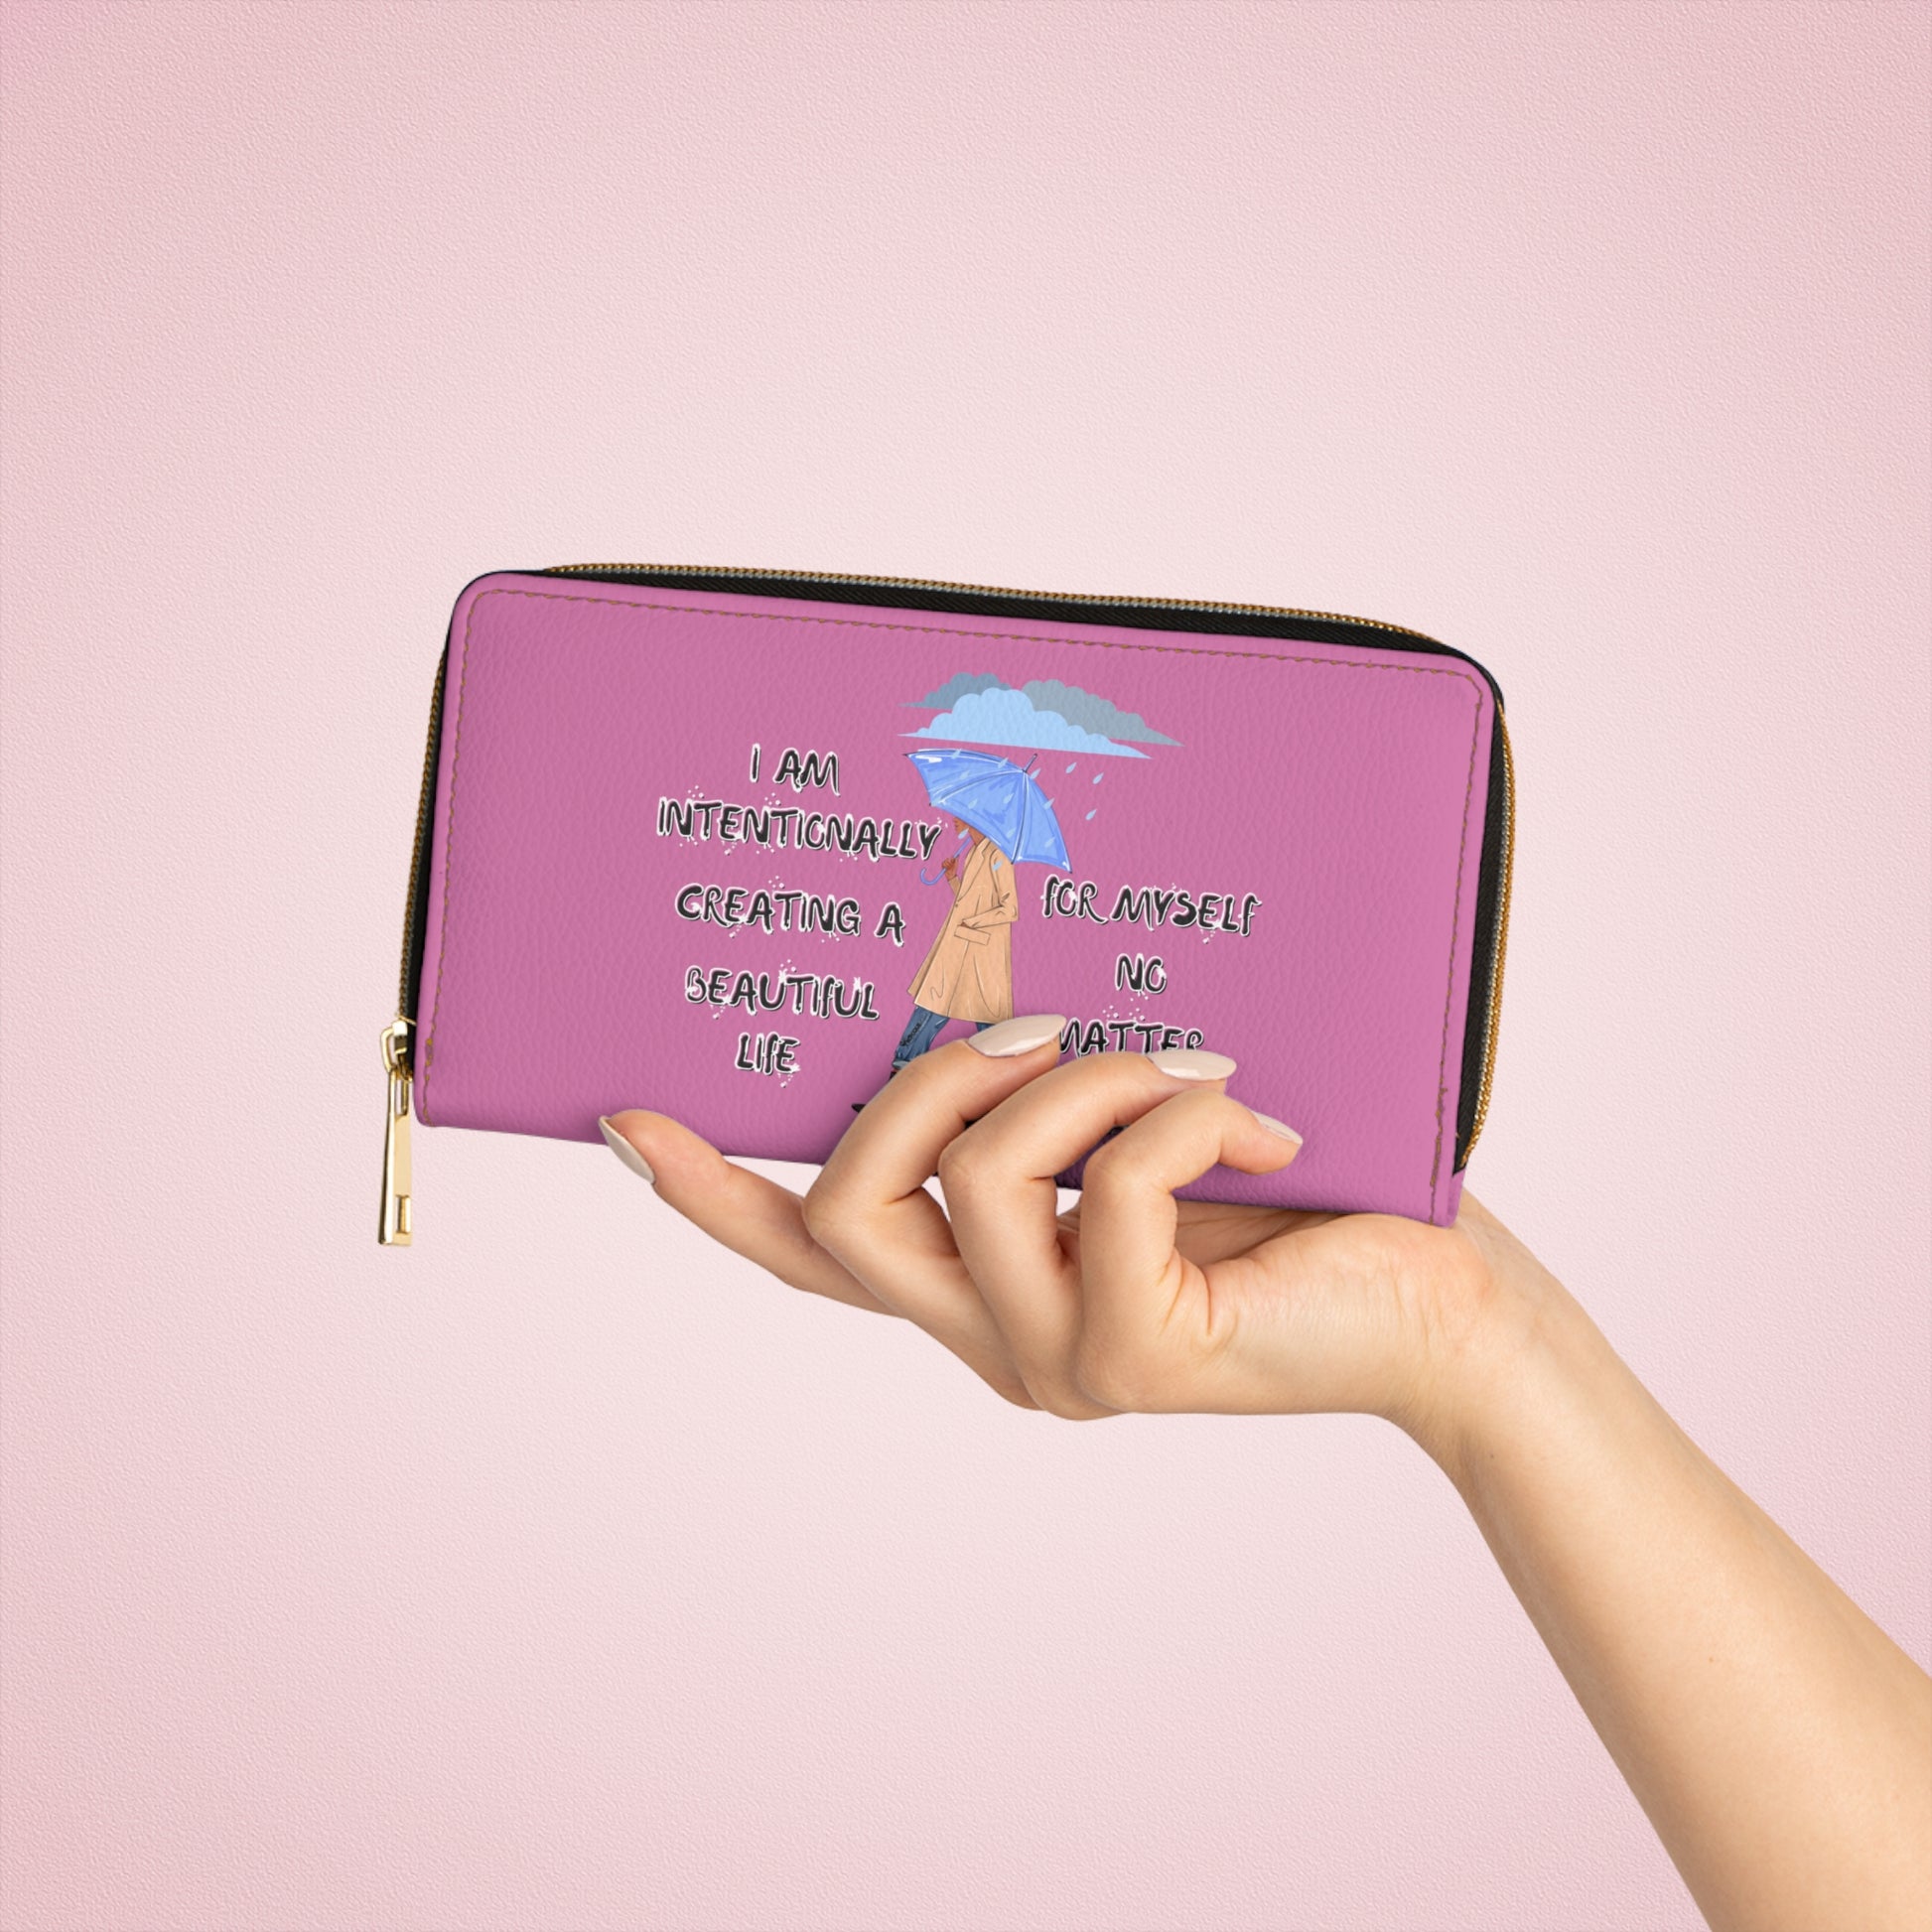 "I AM Intentionally Creating A Beautiful Life"- Positive Afrocentric Affirmation Vegan Leather Wallet Bag- Empower Your Style and Self-Love' ; Pink Wallet